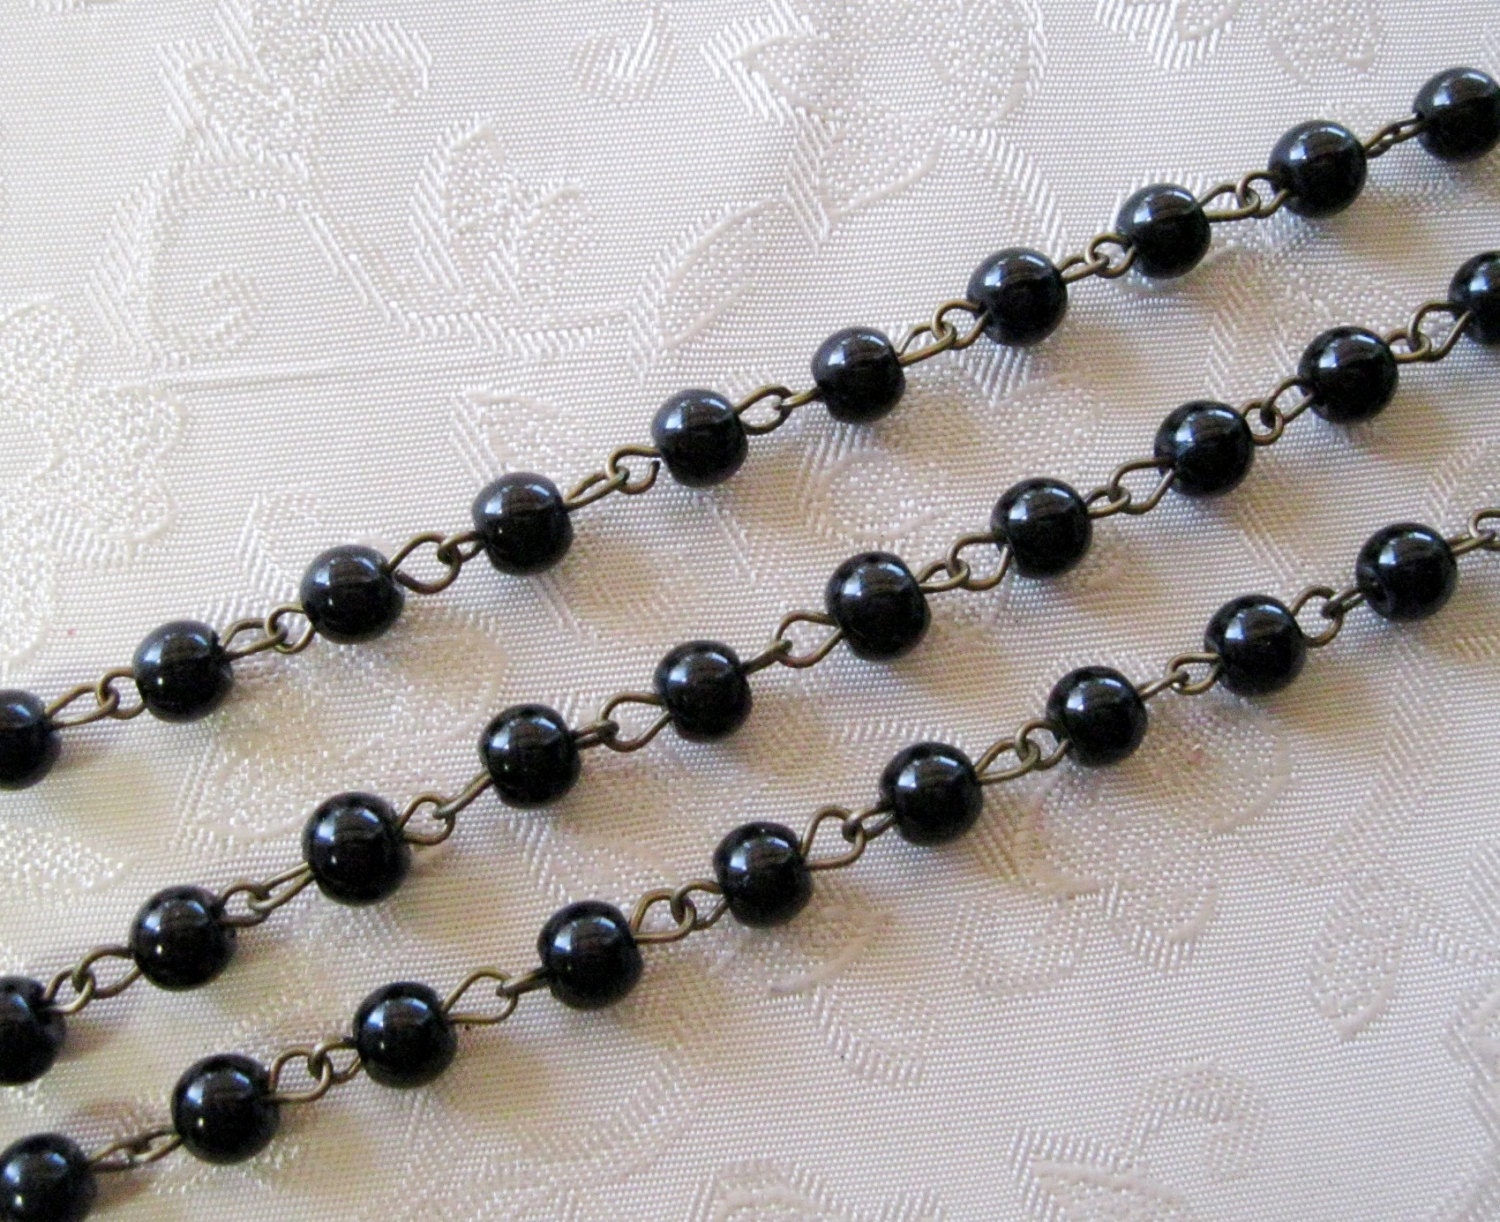 Black pearls,pearl beads,strand of pearls,craft supplies,pearls for  crafts,craft pearls,string of beads,beads on a string,beads trim,196